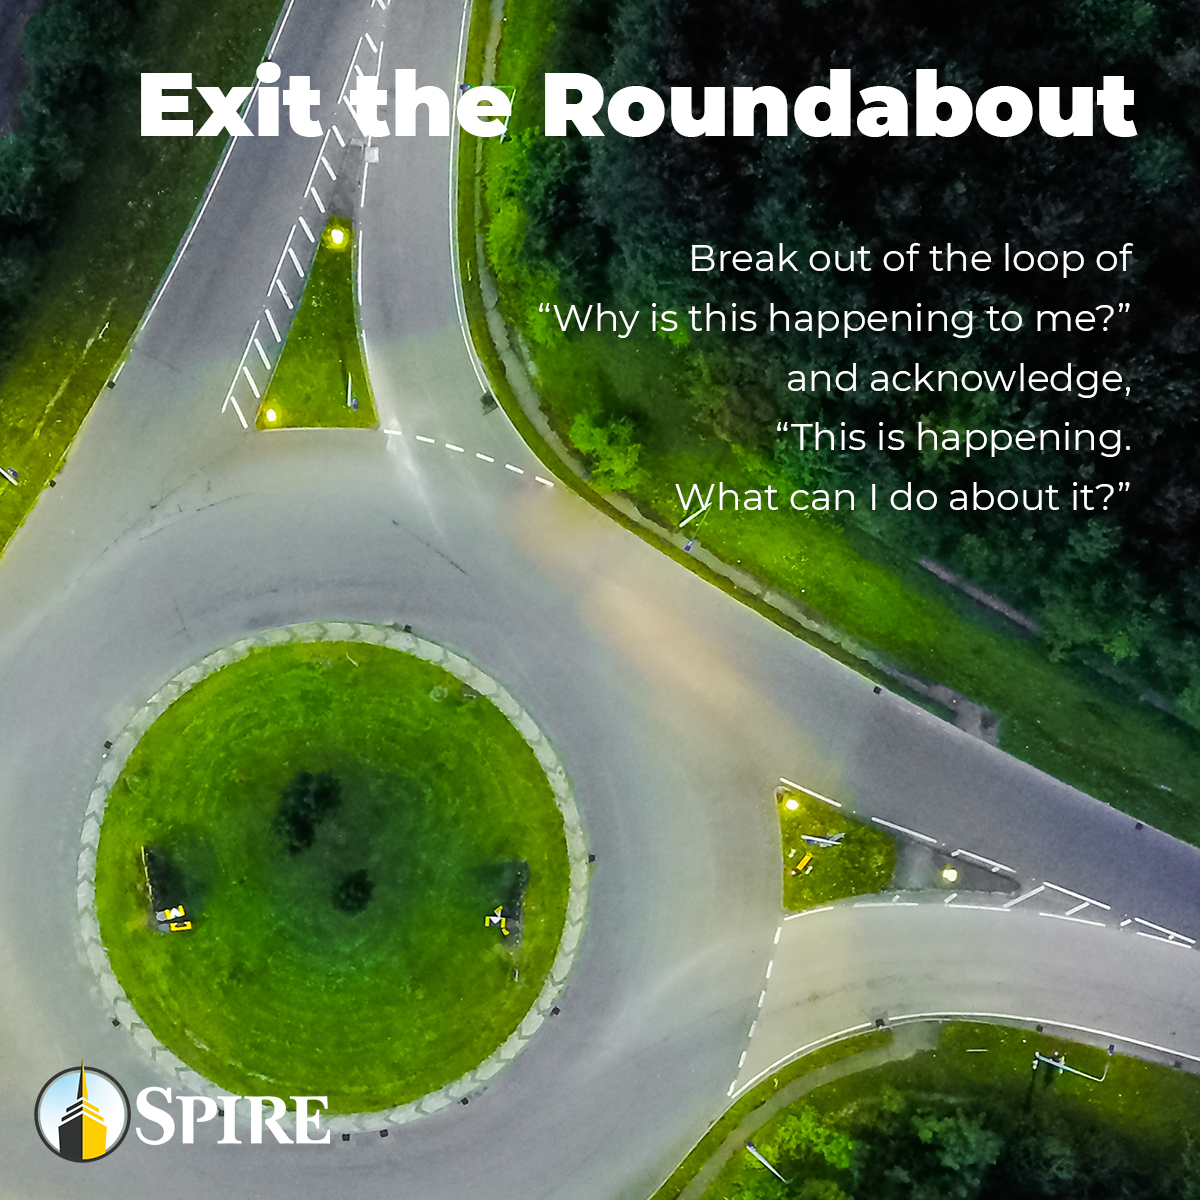 exit the roundabout, hero's journey, marketing messaging, crisis communication, Spire